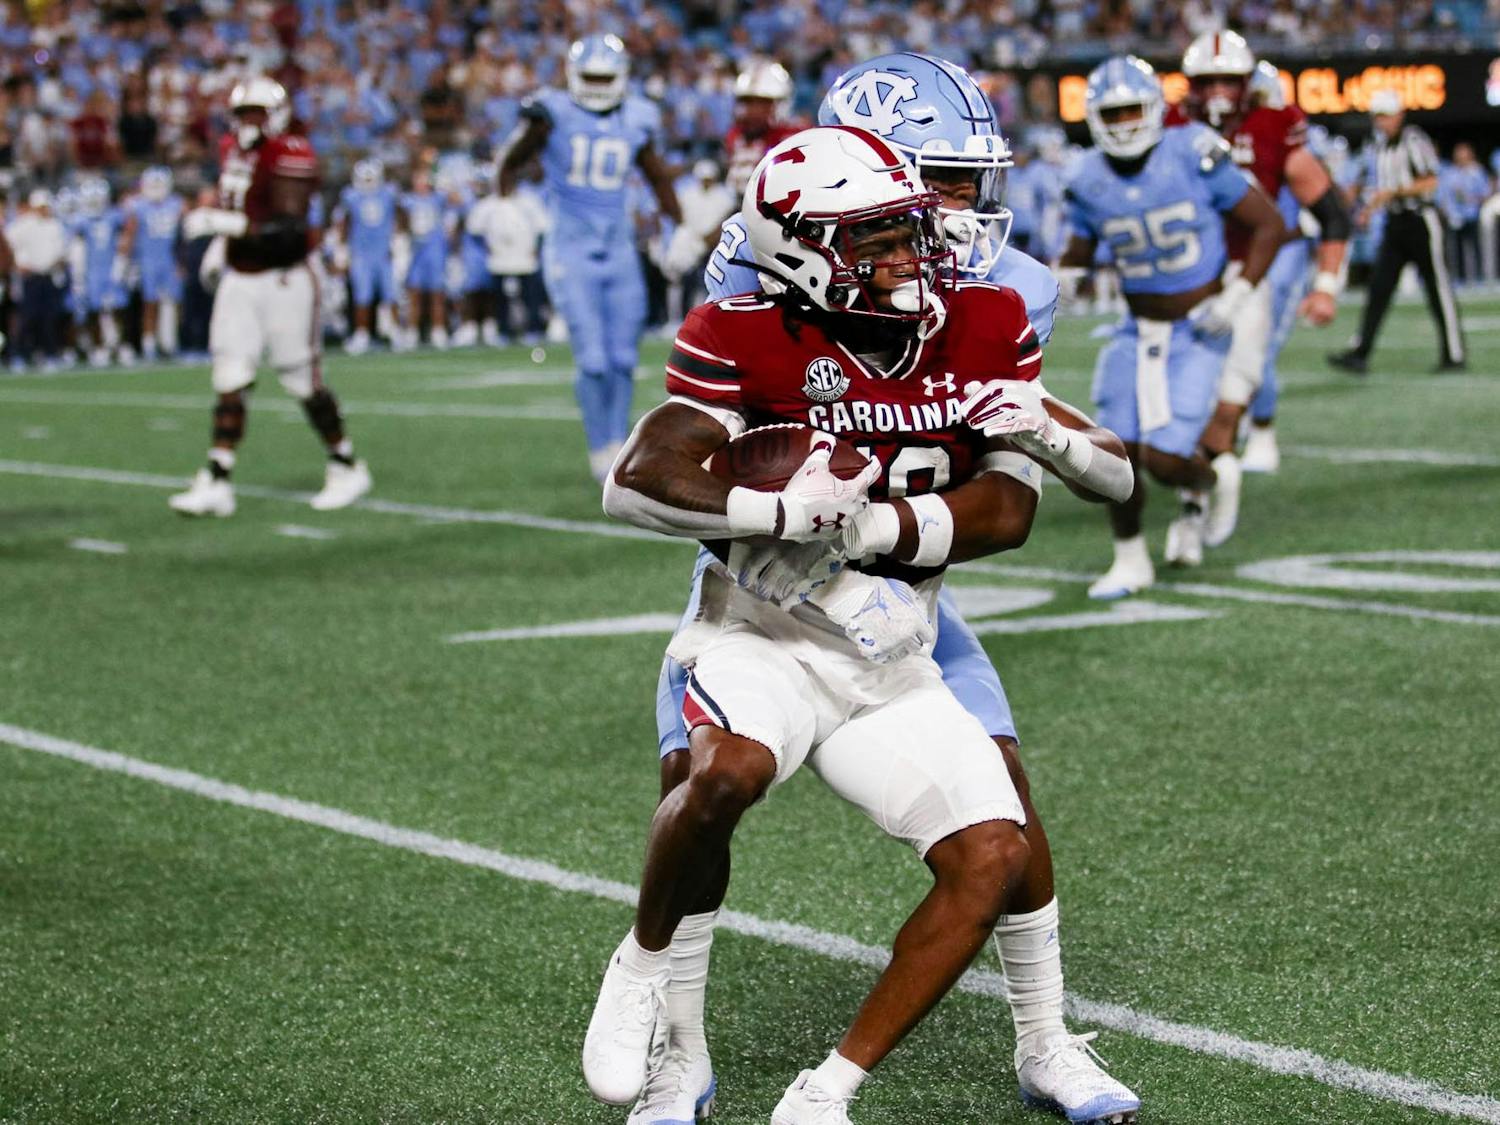 Fifth-year wide receiver Ahmarean Brown is tackled after gaining yards for South Carolina. The Gamecocks lost to the Tar Heels 31-17 on Sept. 2, 2023.